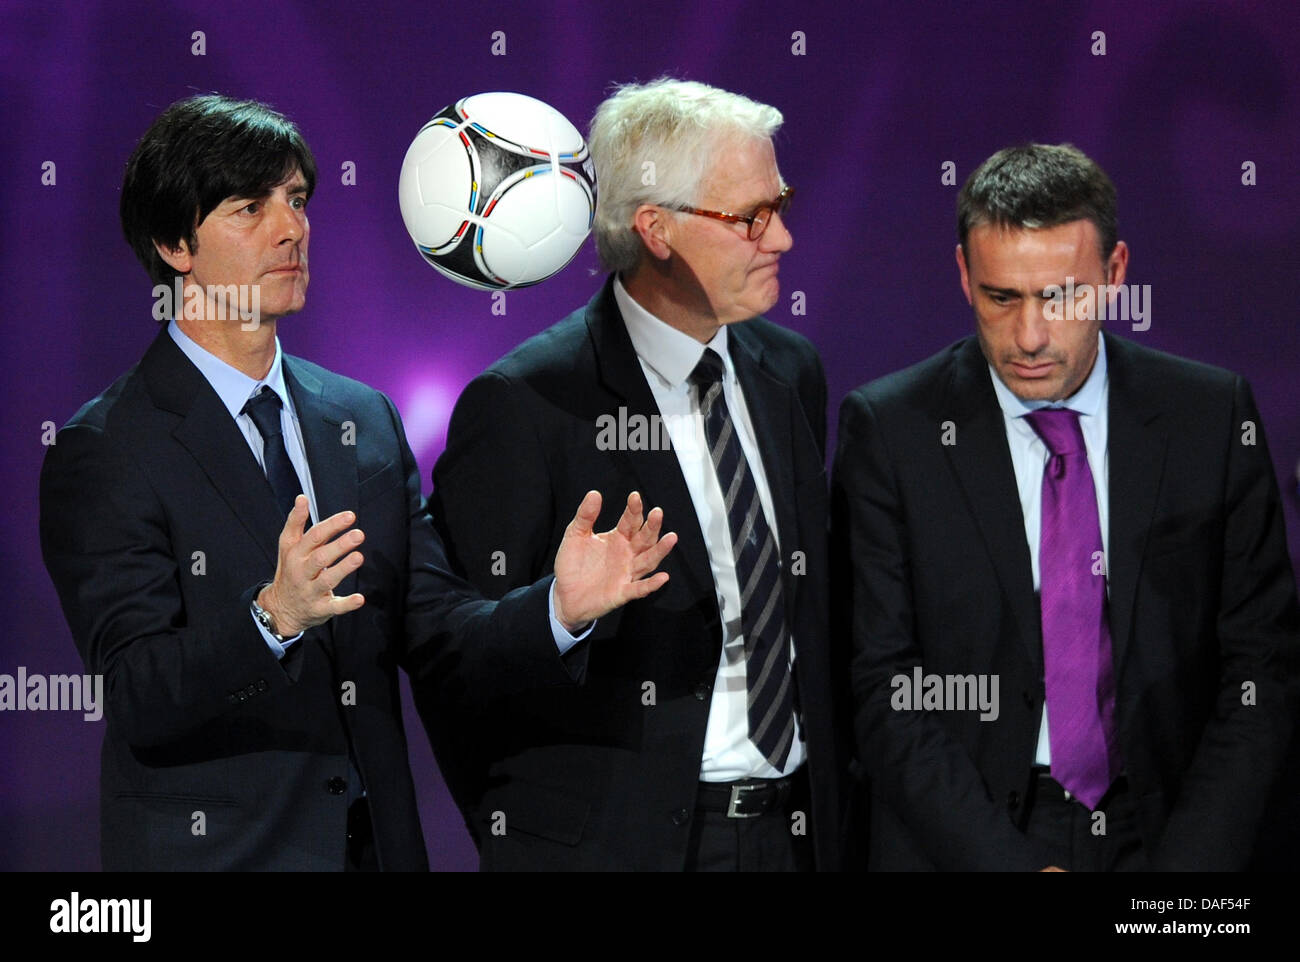 Coach Joachim Loew of Germany (l, with coach Morton Olson of Denmark (C) and coach Paulo Bento of Portugal) plays with the new official EURO ball during the final draw for the UEFA EURO 2012 soccer championships at the Palace of Arts in Kiev, Ukraine, 02 December 2012. The European soccer championships will take place from 08 June to 01 July 2012 in Poland and Ukraine. Photo: Thoma Stock Photo